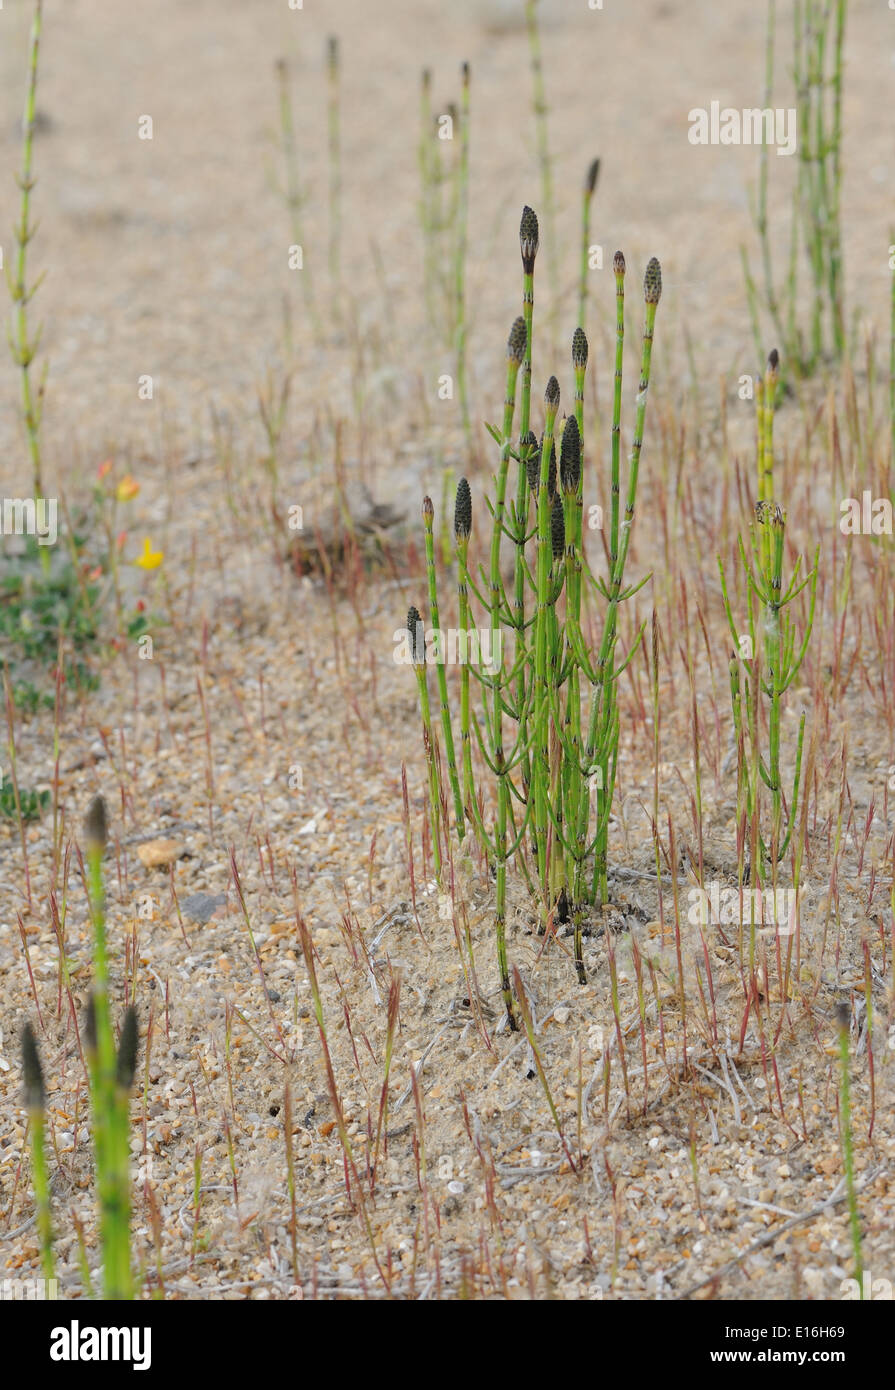 Cone-like, spore-bearing strobili at the tips of shoots of field horsetail, common horsetail or mare's tail (Equisetum arvense) growing in sand Stock Photo